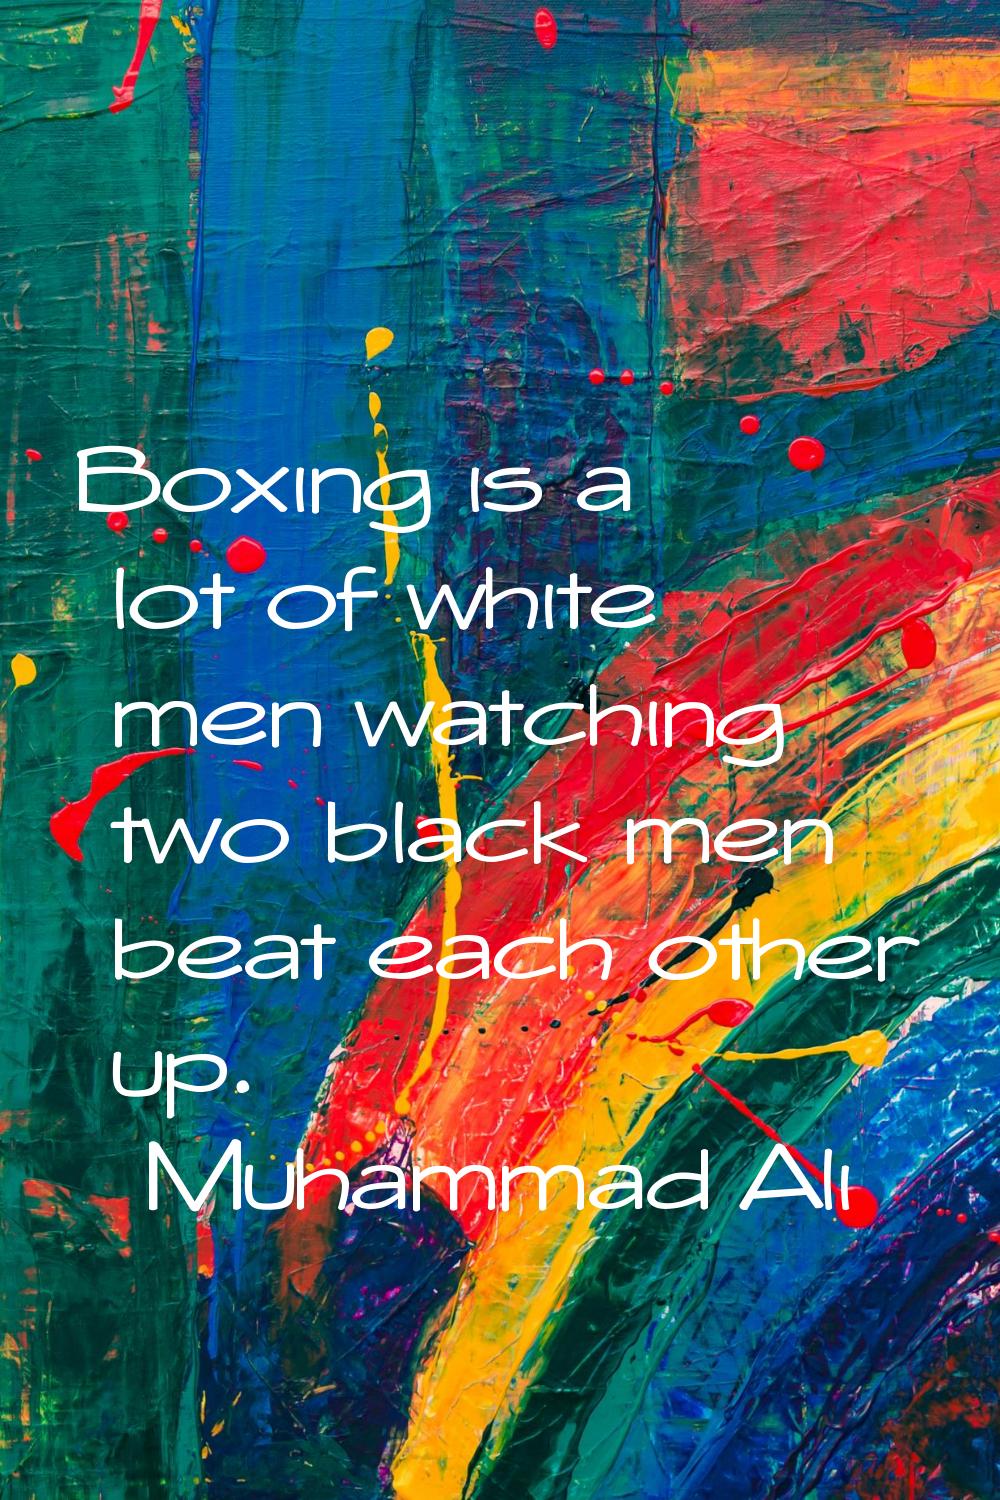 Boxing is a lot of white men watching two black men beat each other up.